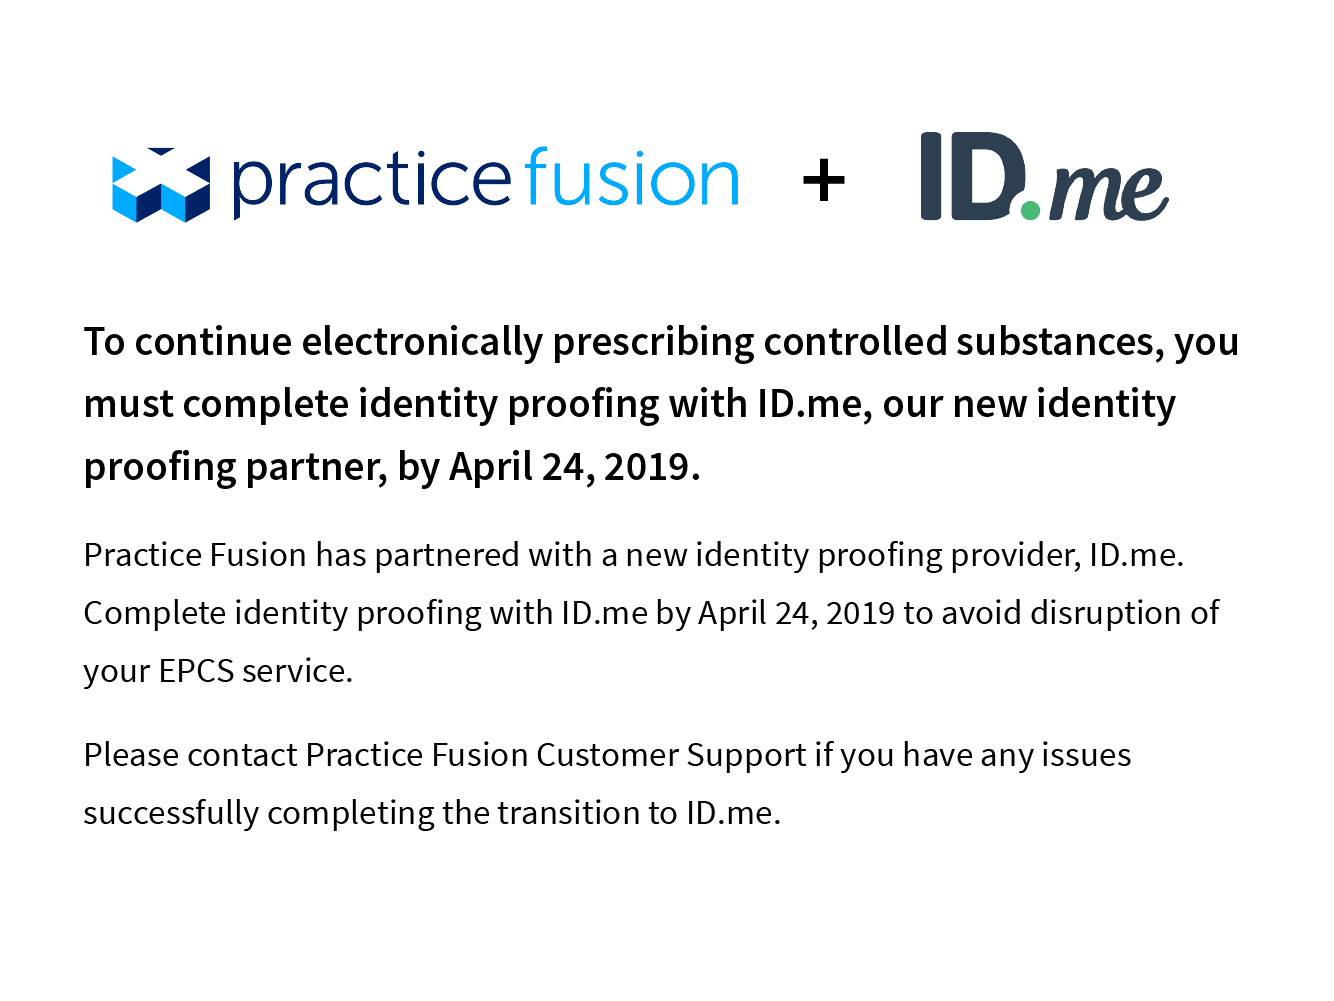 To continue electronically prescribing controlled substances, you must complete identity proofing with ID.me, our new identity proffing partner, by April 24, 2019. Practice Fusion has partnered with a new identity proofing provider, ID.me. Complete identity proofing with ID.me by April 24, 2019 to avoid disruption of your EPCS service. Please contact Practice Fusion Customer Support if you have any issues successfully complete the transistion to ID.me.